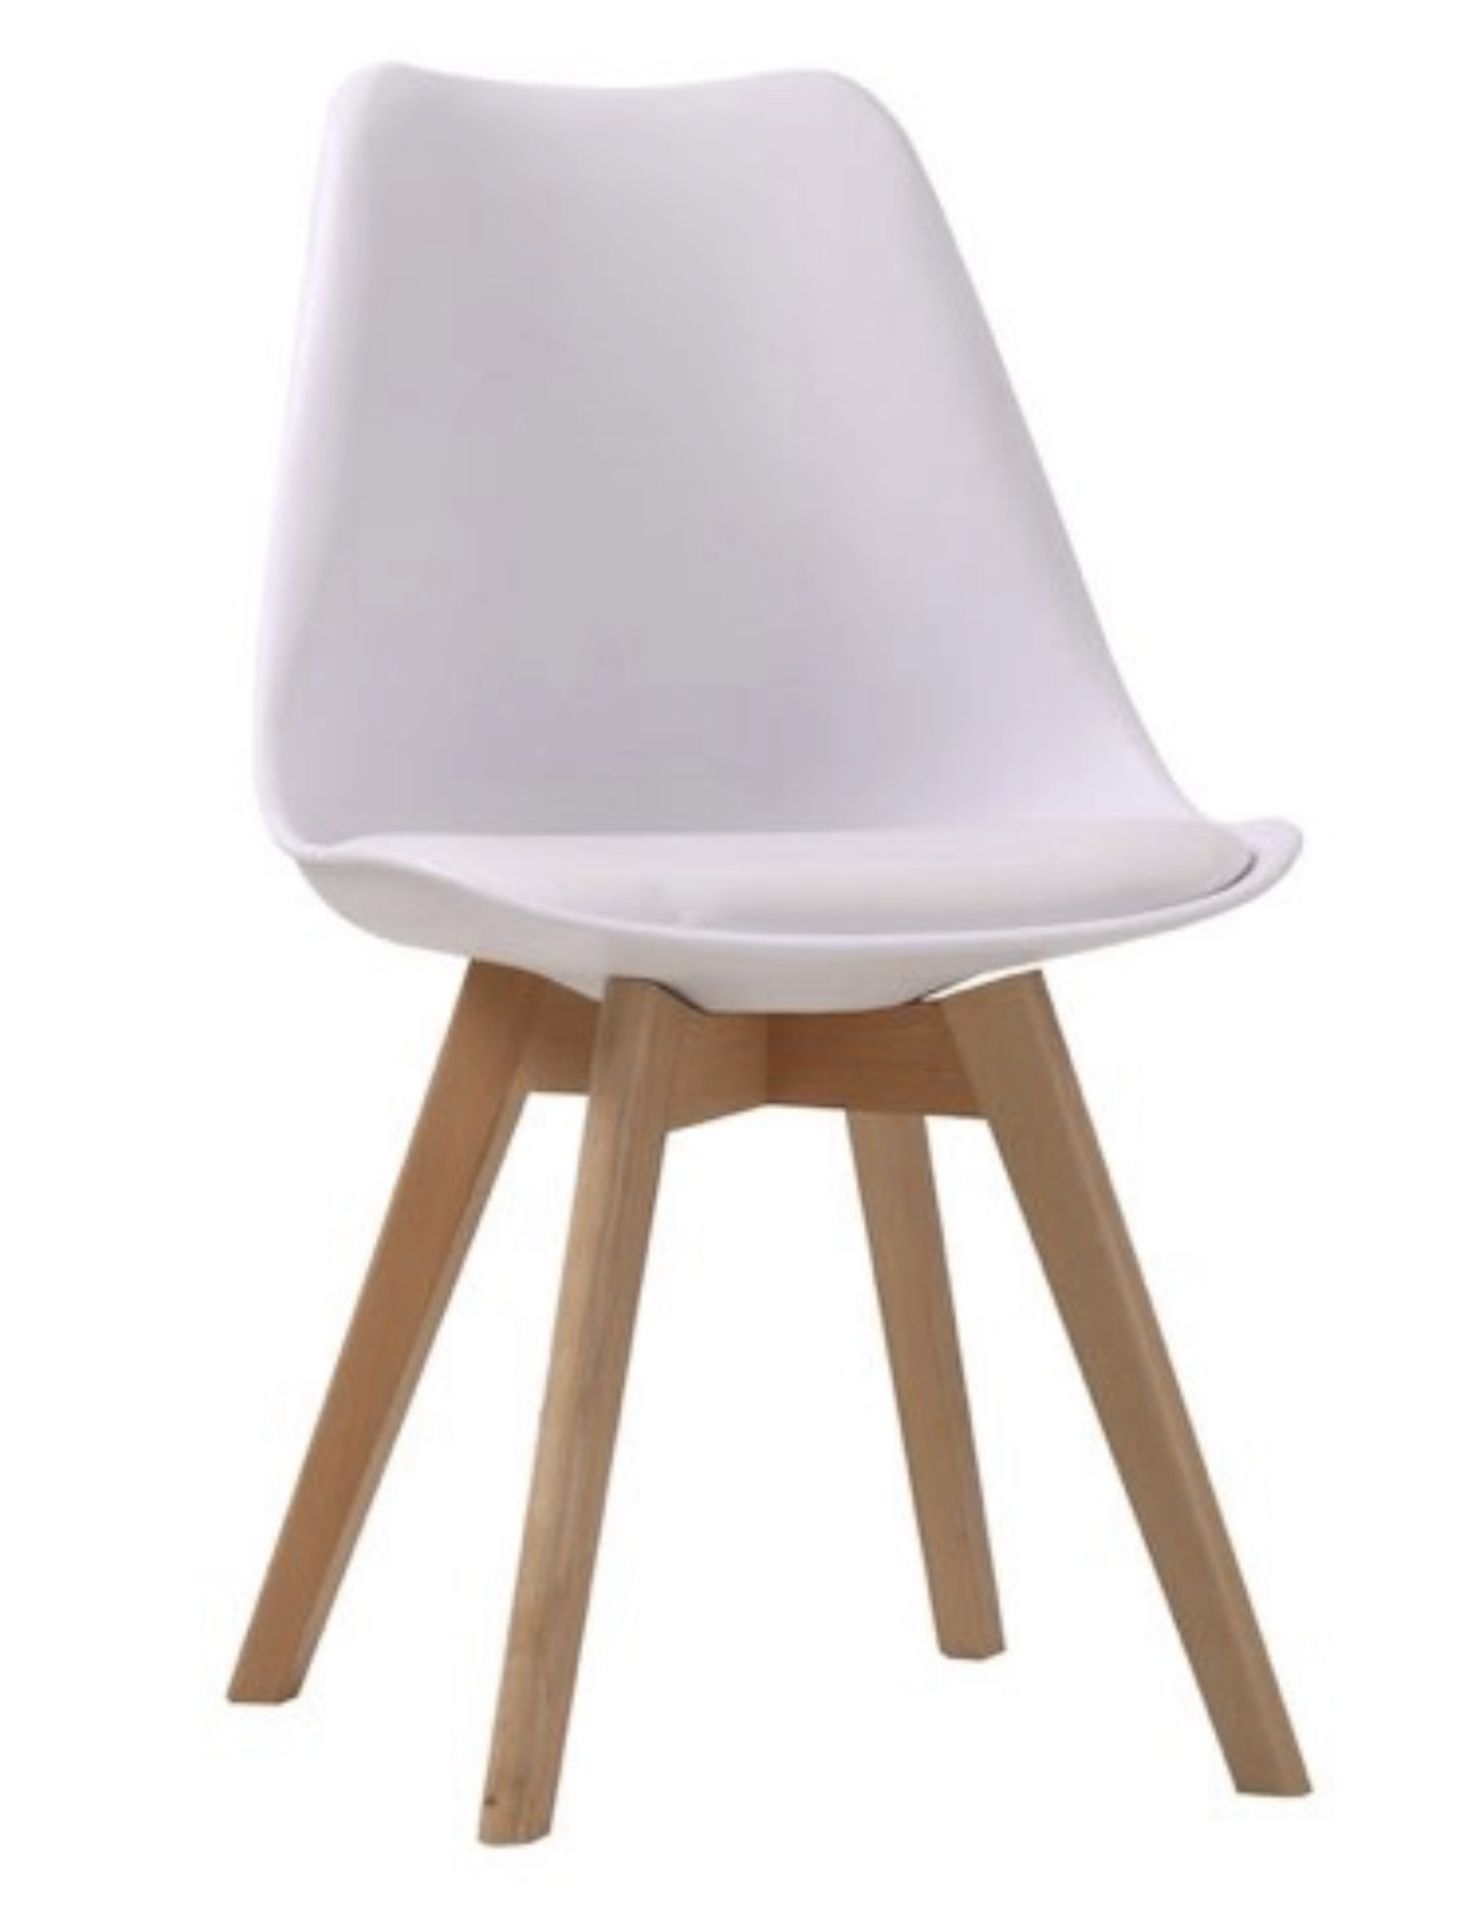 LOUVRE PAIR OF PADDED DINING CHAIRS
IN WHITE - RRP £179 PER PAIR - Image 2 of 3